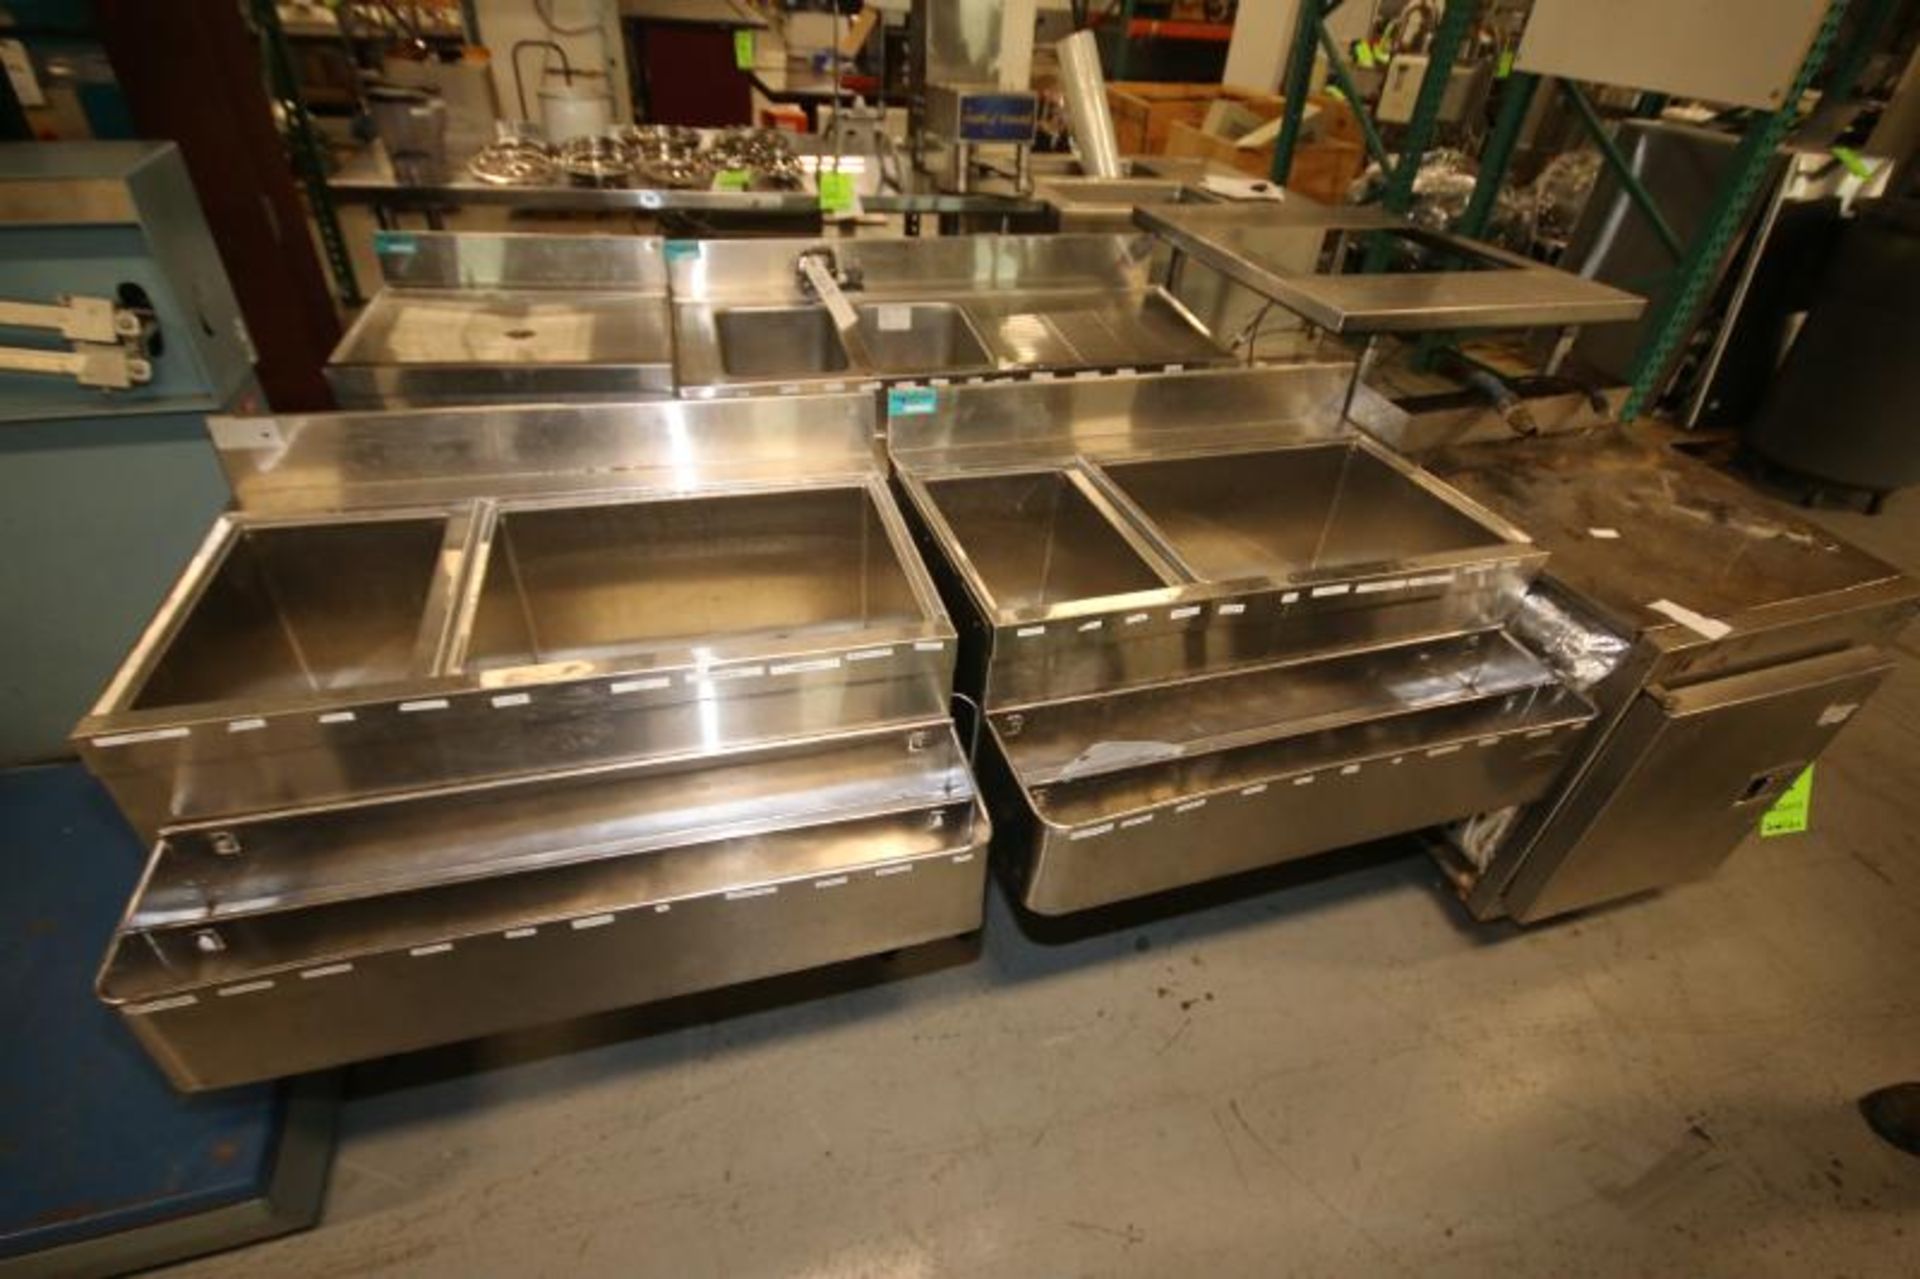 6 pcs Assorted S/S Restaurant Sink Stations, Includes Cleveland Steam Craft Oven, Model 21CGAS, 120V - Image 2 of 3